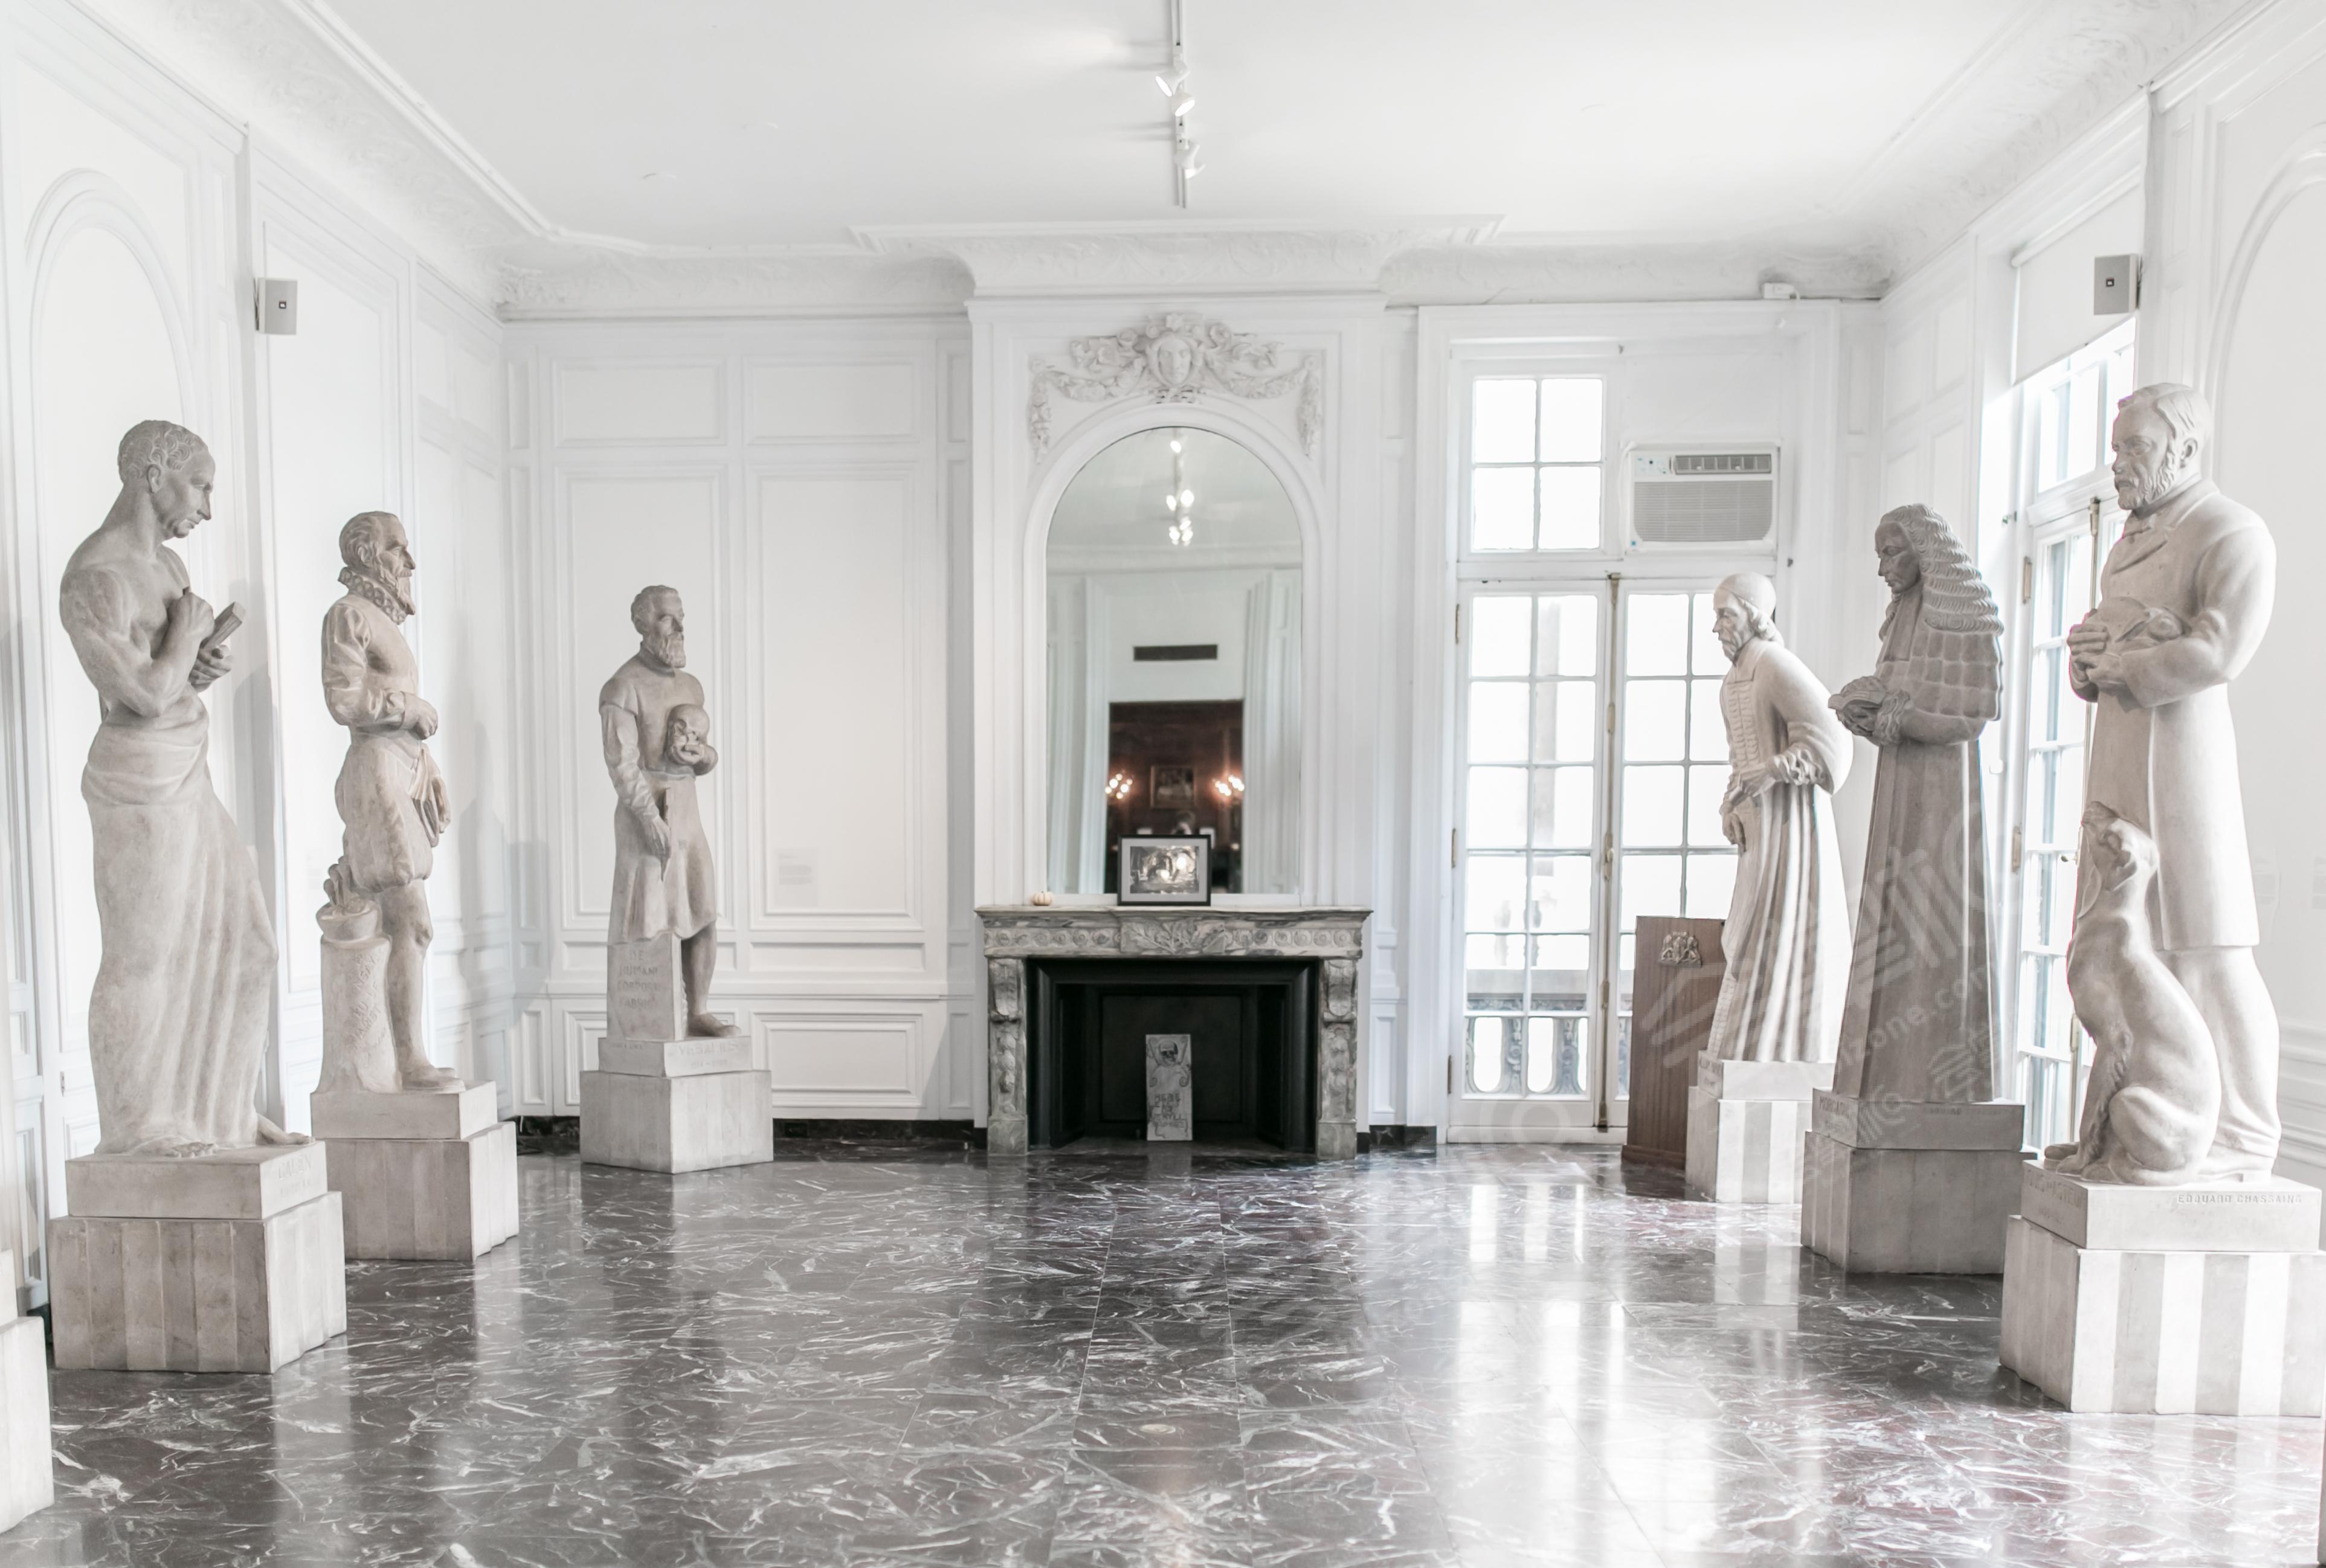 Scientific Museum Housed Within a Historic Lakeside Mansion